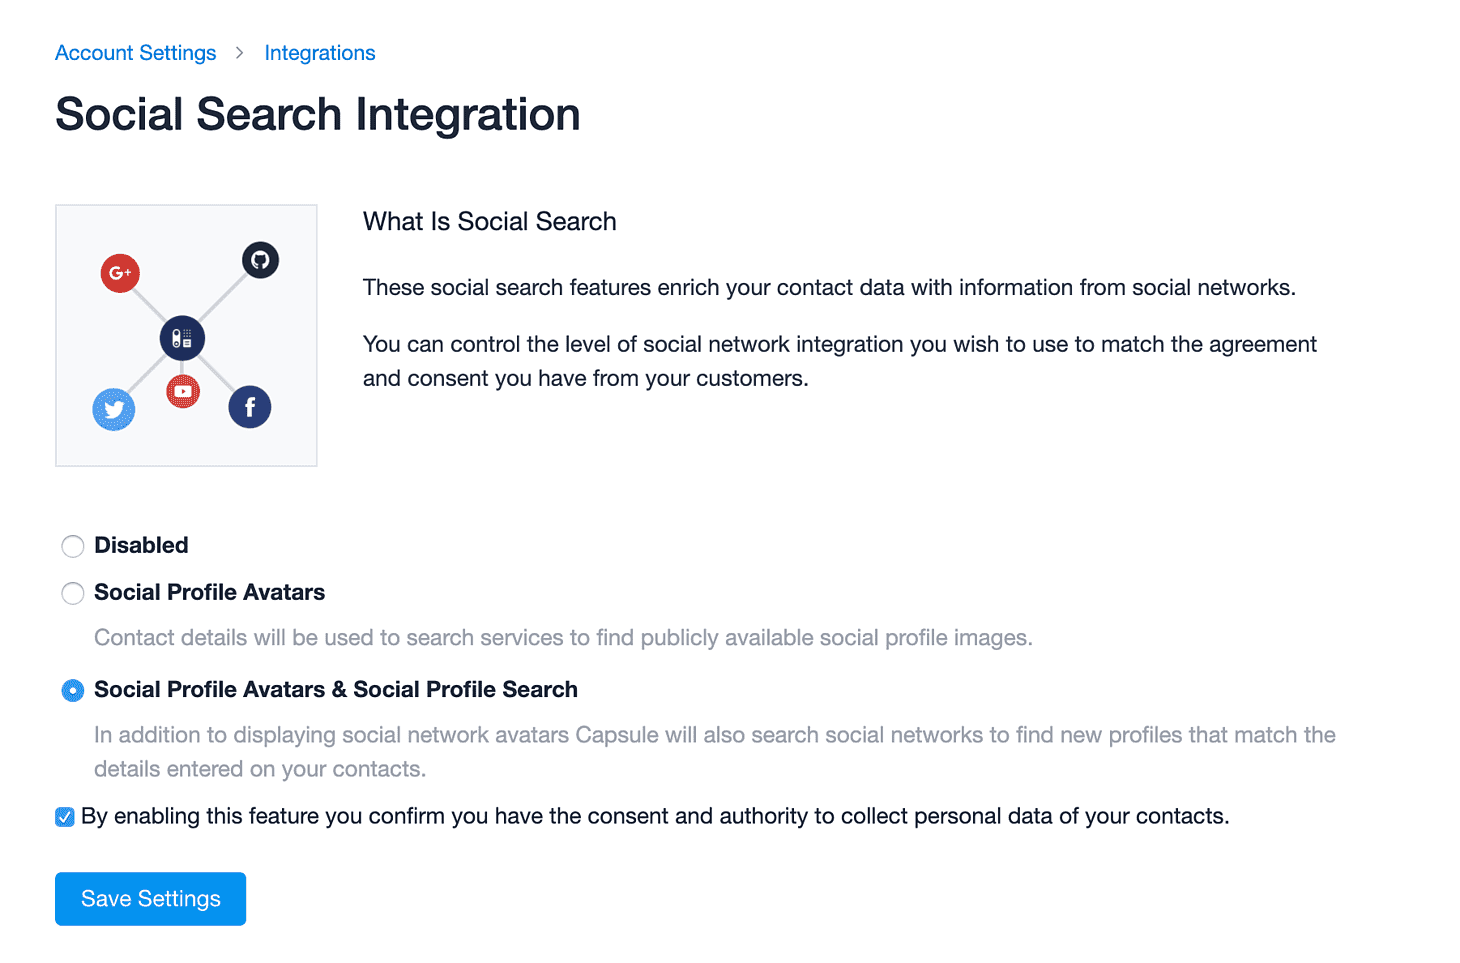 Options for enabling social search integration